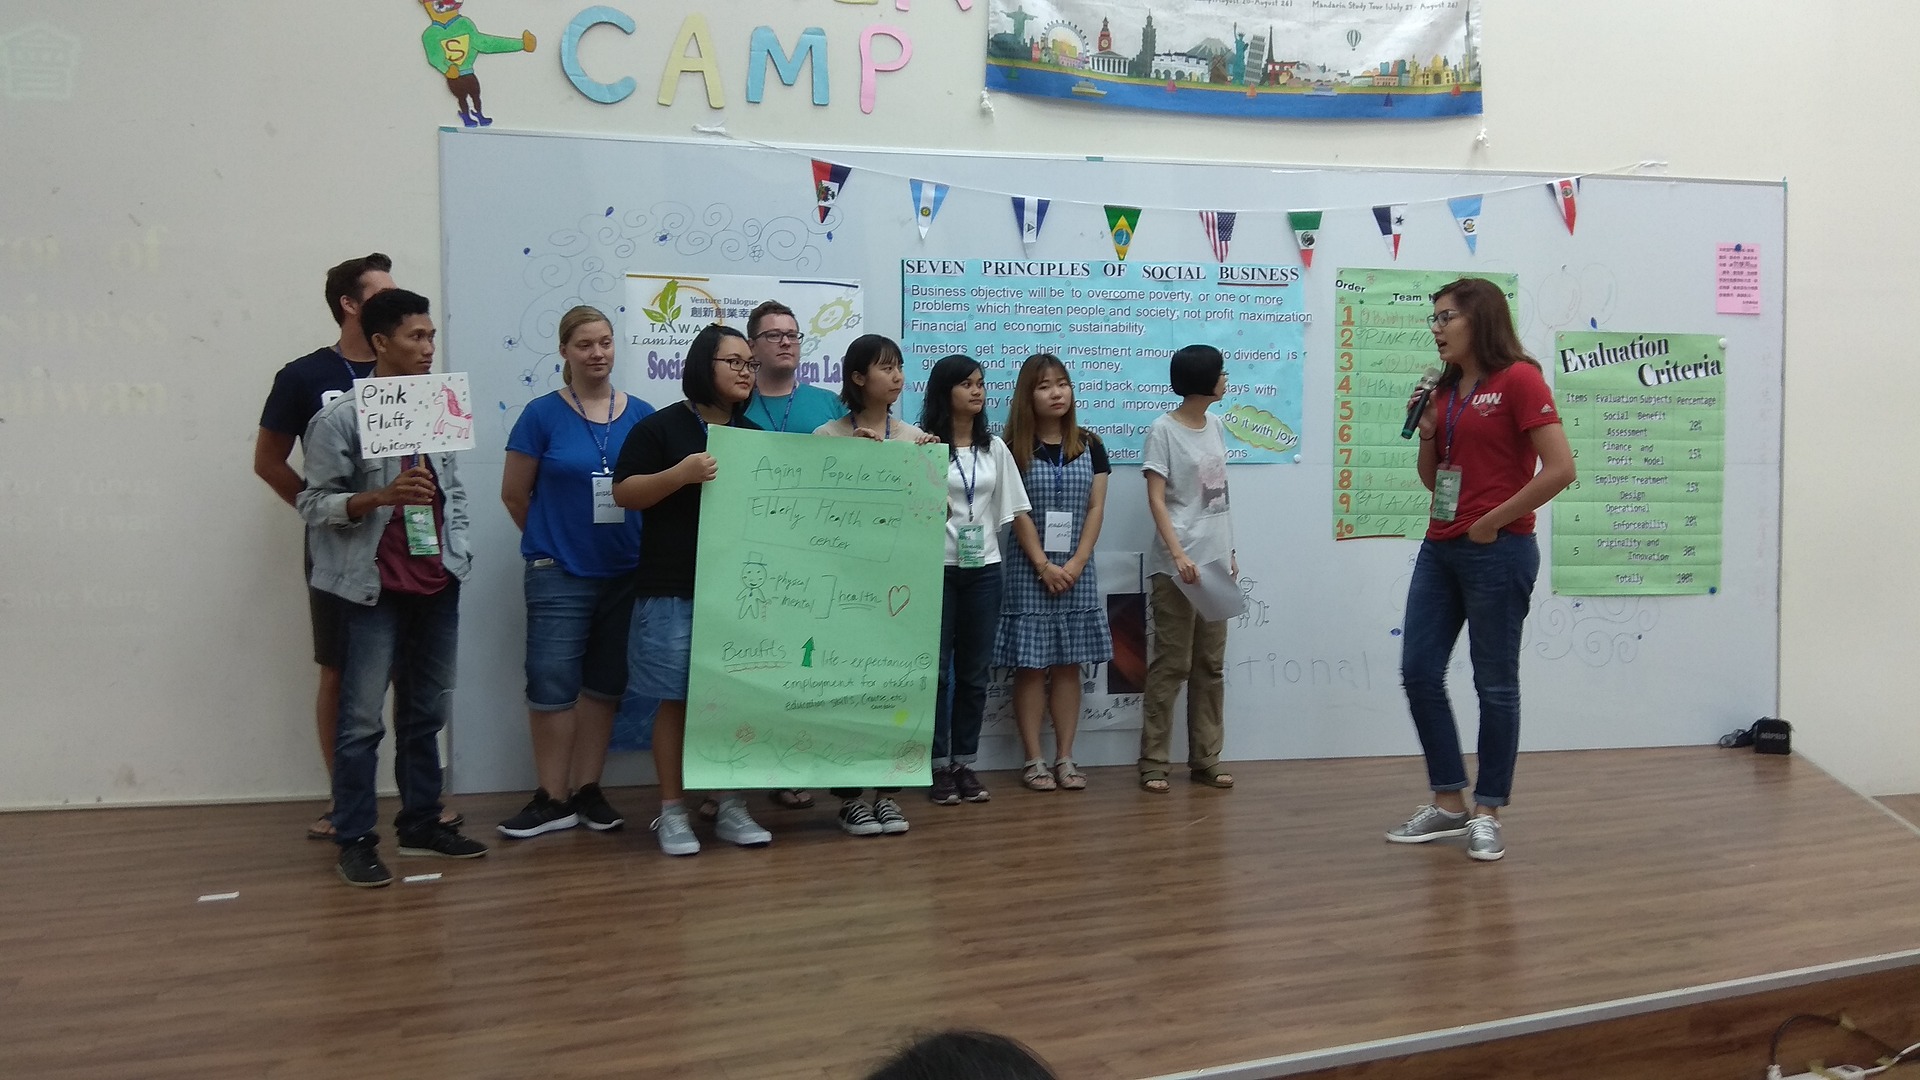 Hundred Youth Summer Camp Excite Creative No Border – "I am here" Venture Dialogue